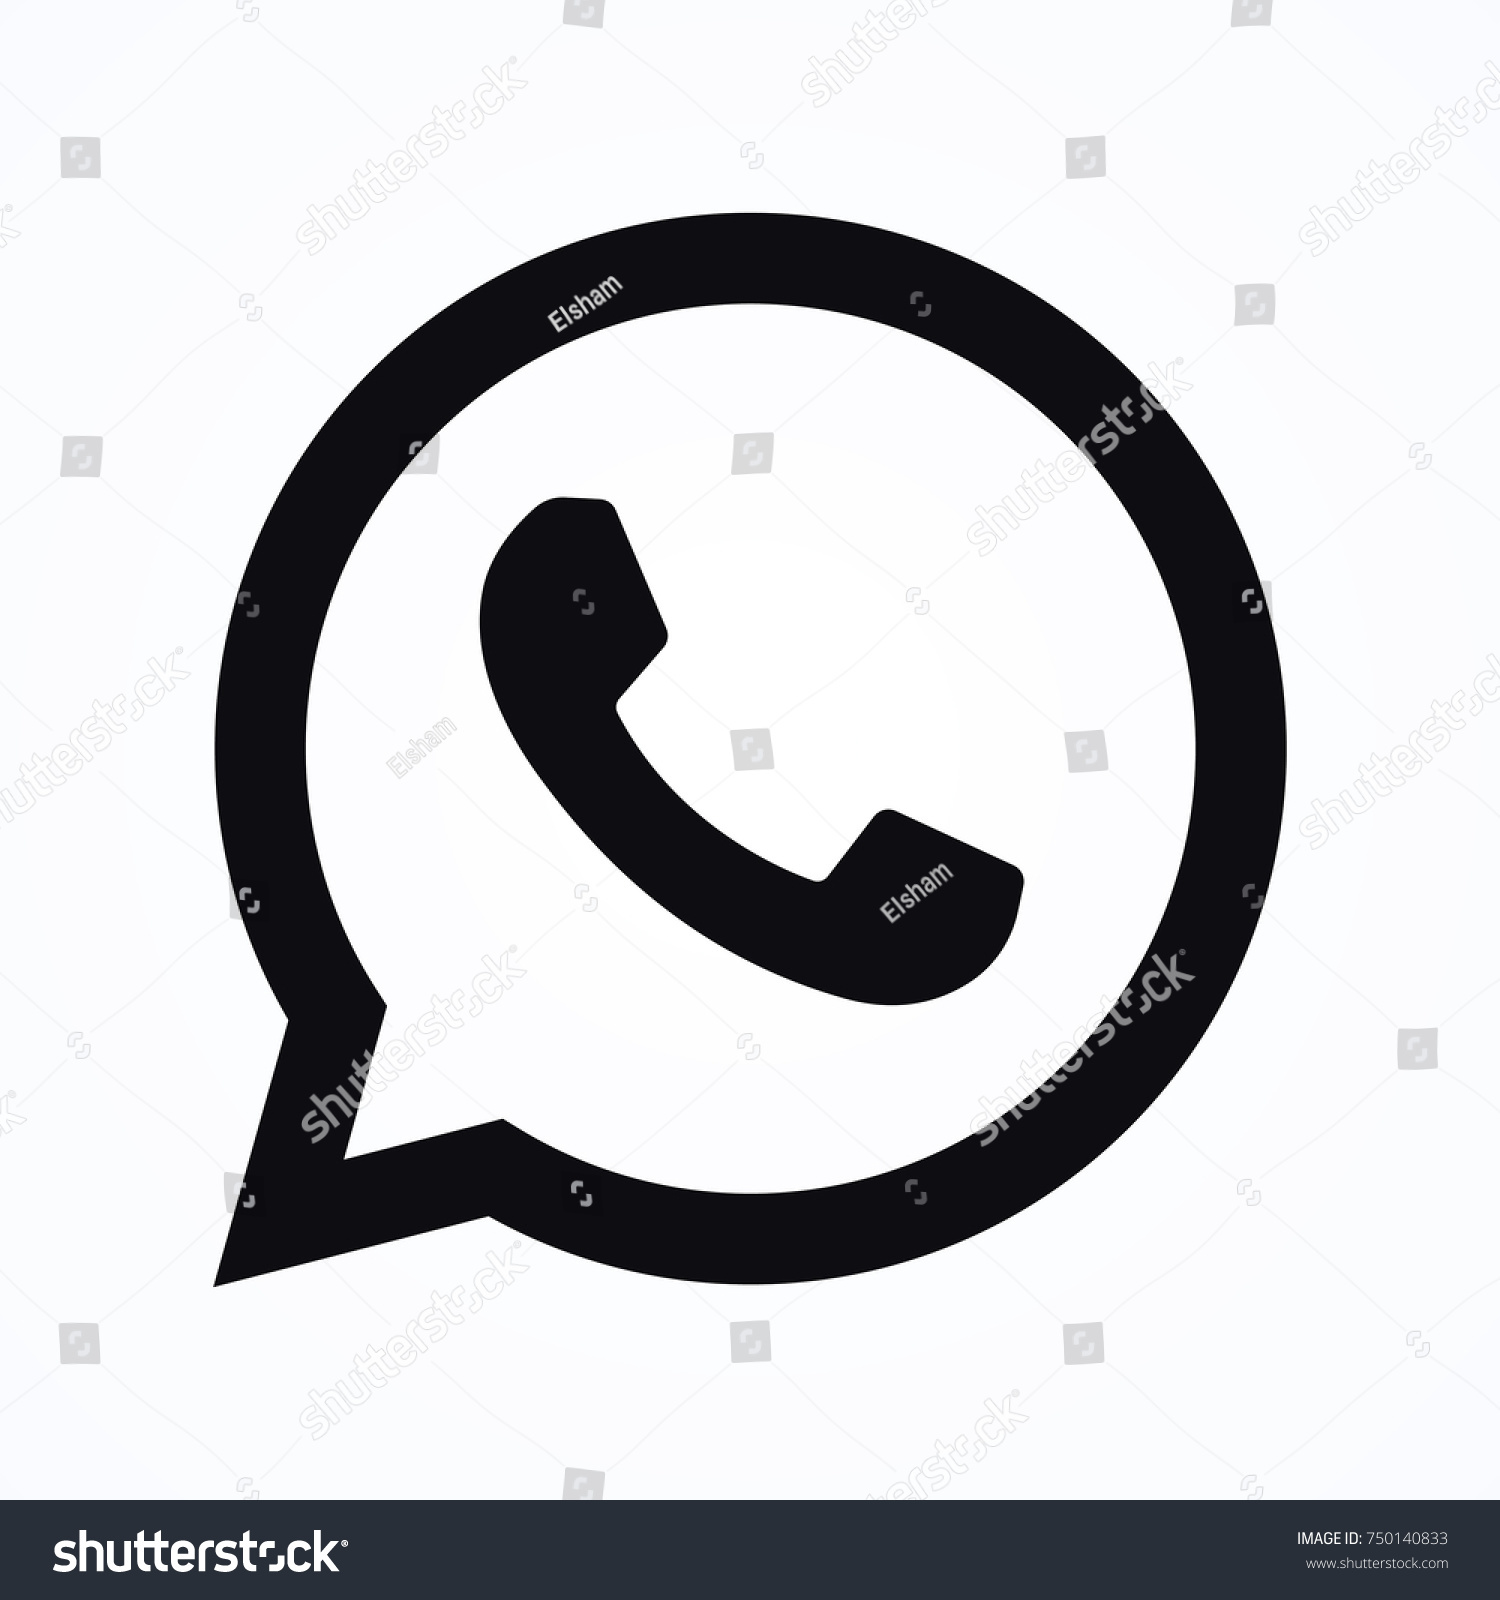 1,961 Whats app icon Images, Stock Photos & Vectors | Shutterstock